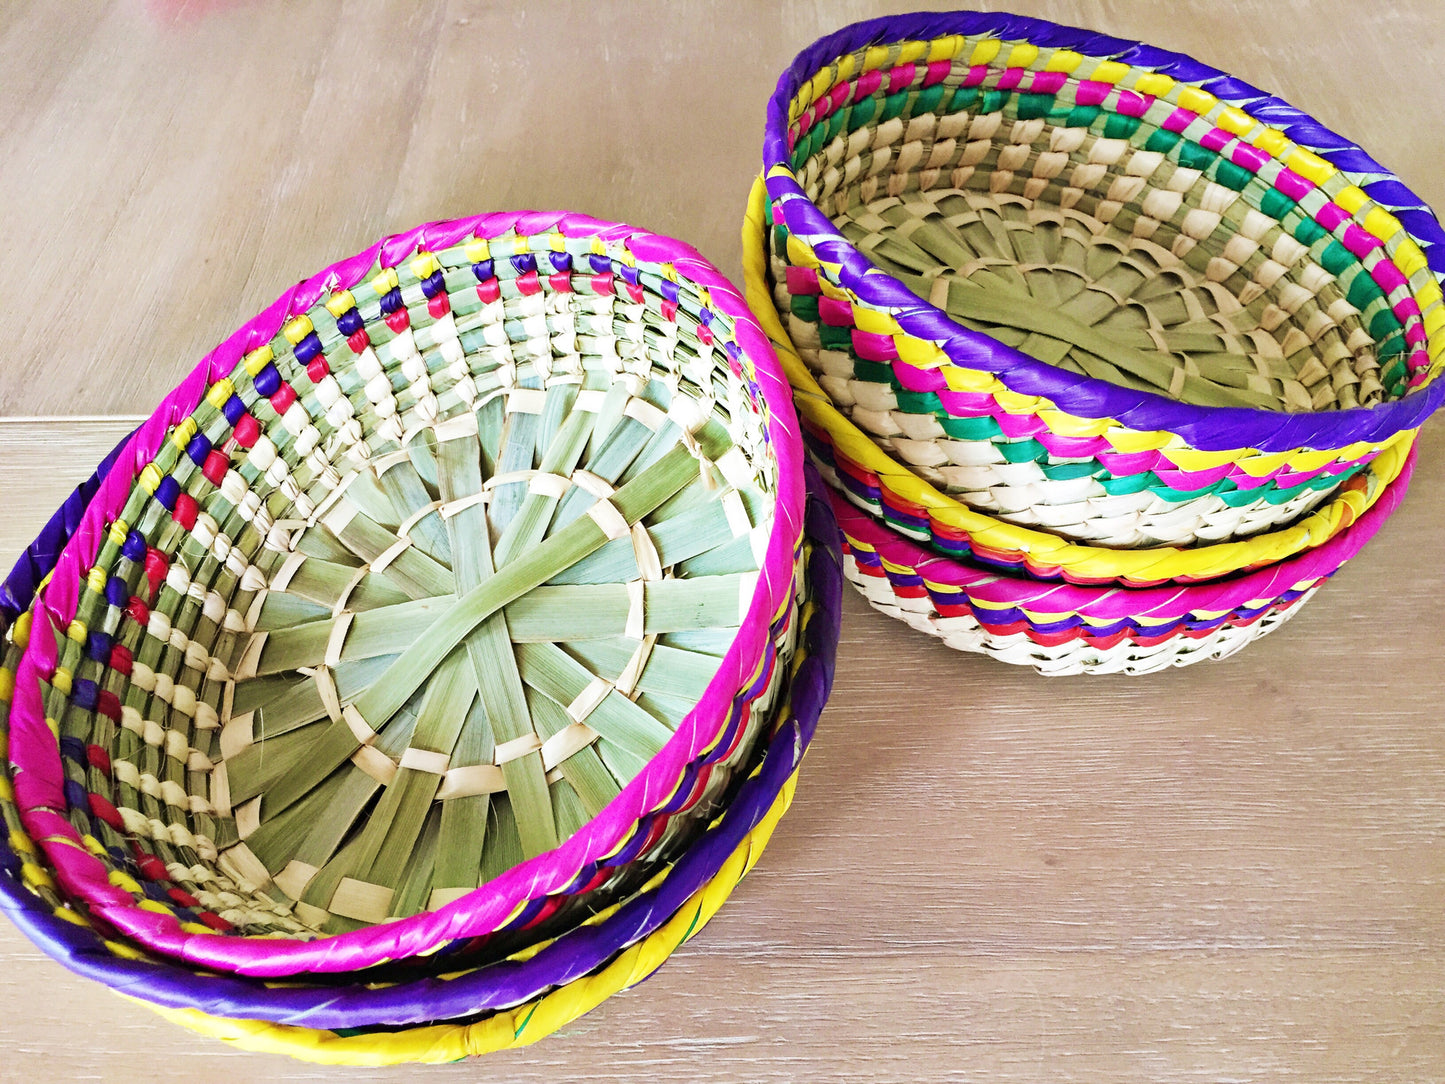 Straw woven Decorative Basket from Mexico - MesaChic - 2